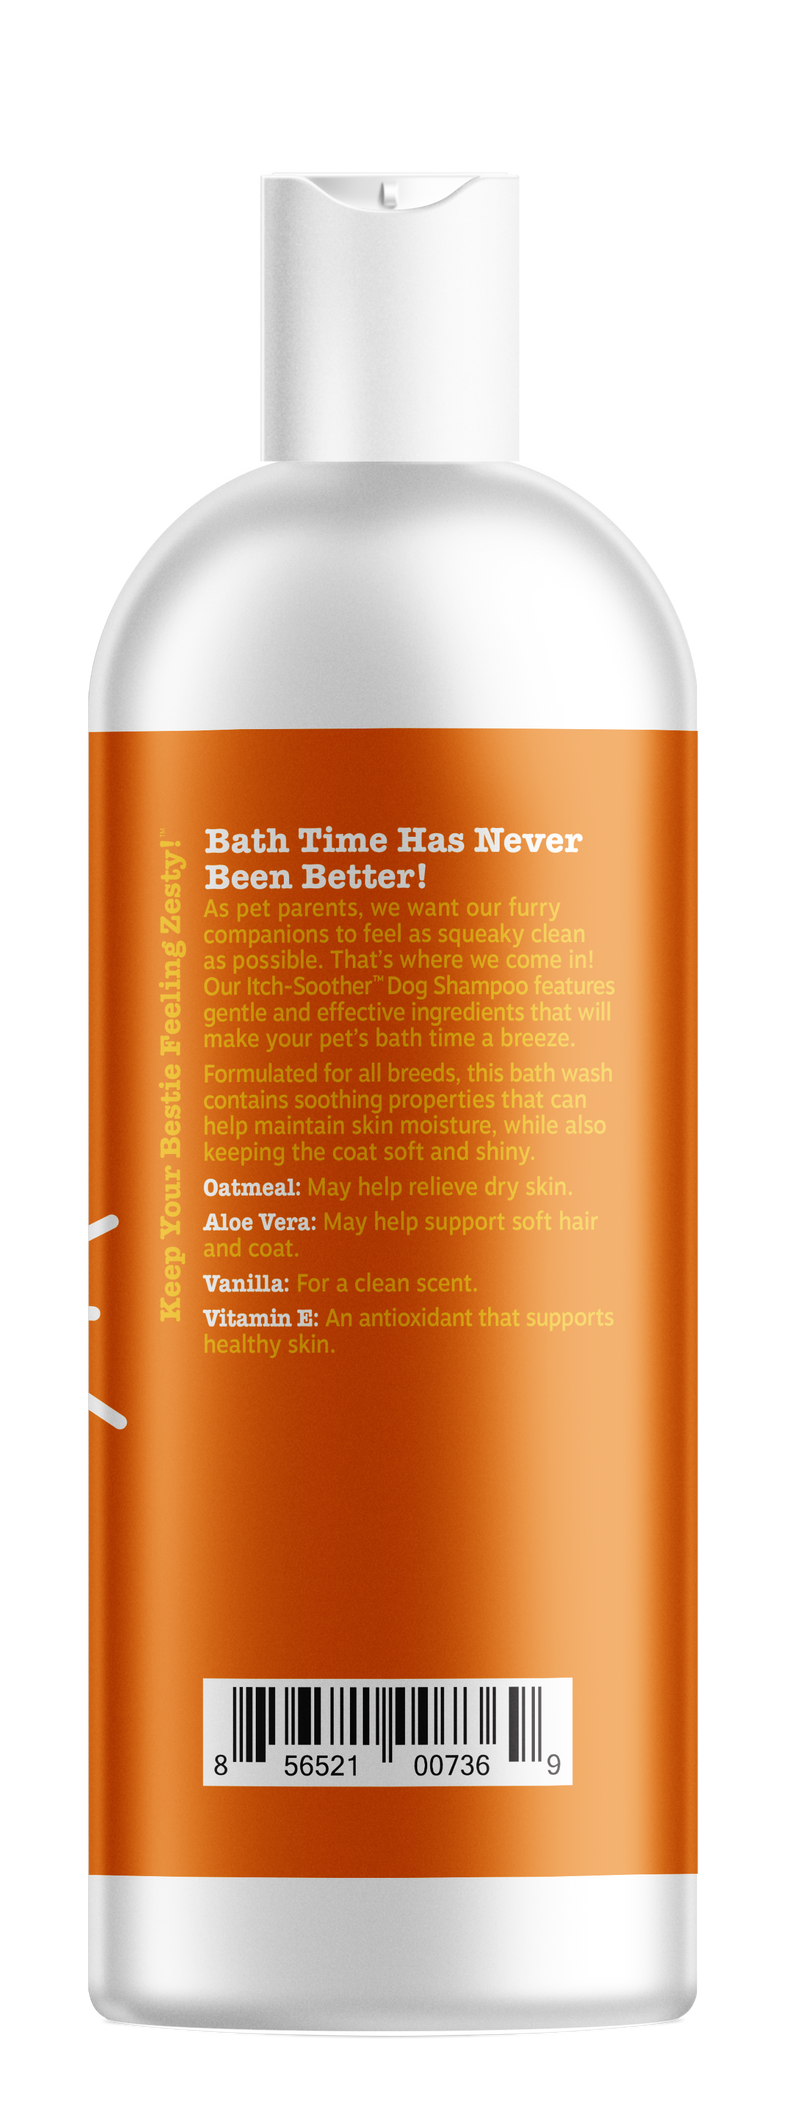 Itch-Soother Shampoo for Dogs